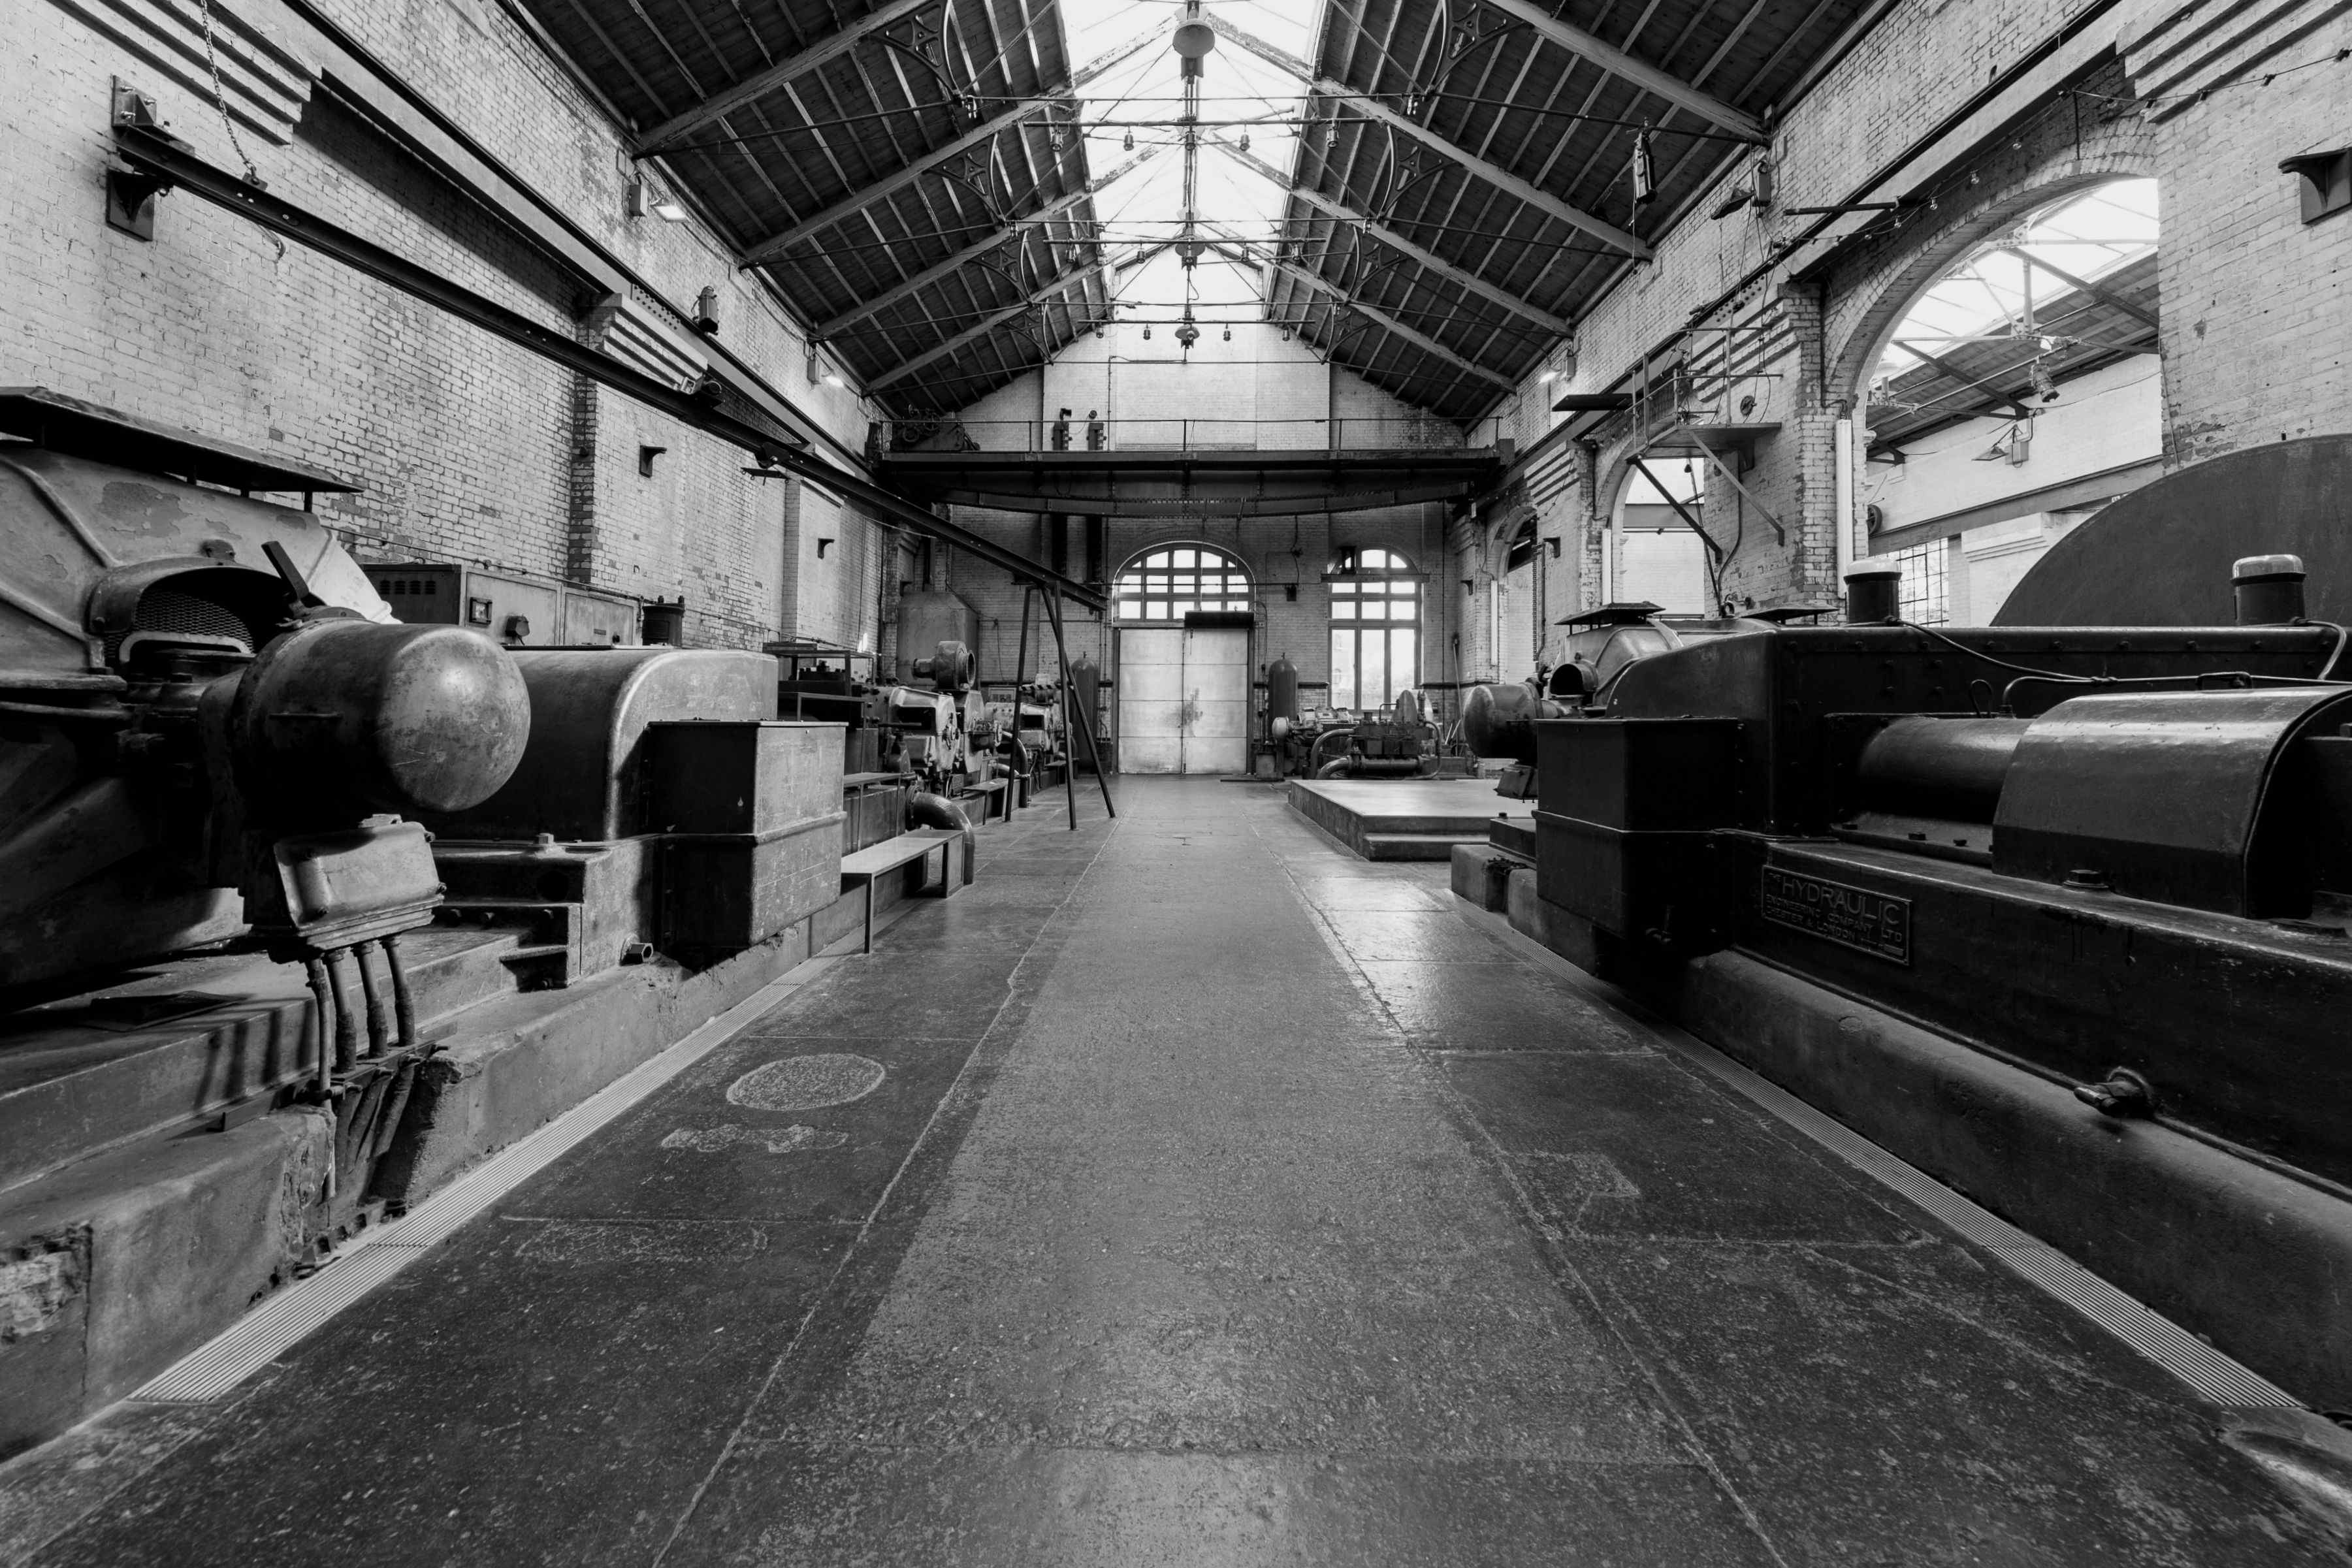 The Hydraulic Power Station, Blank Canvas Venues